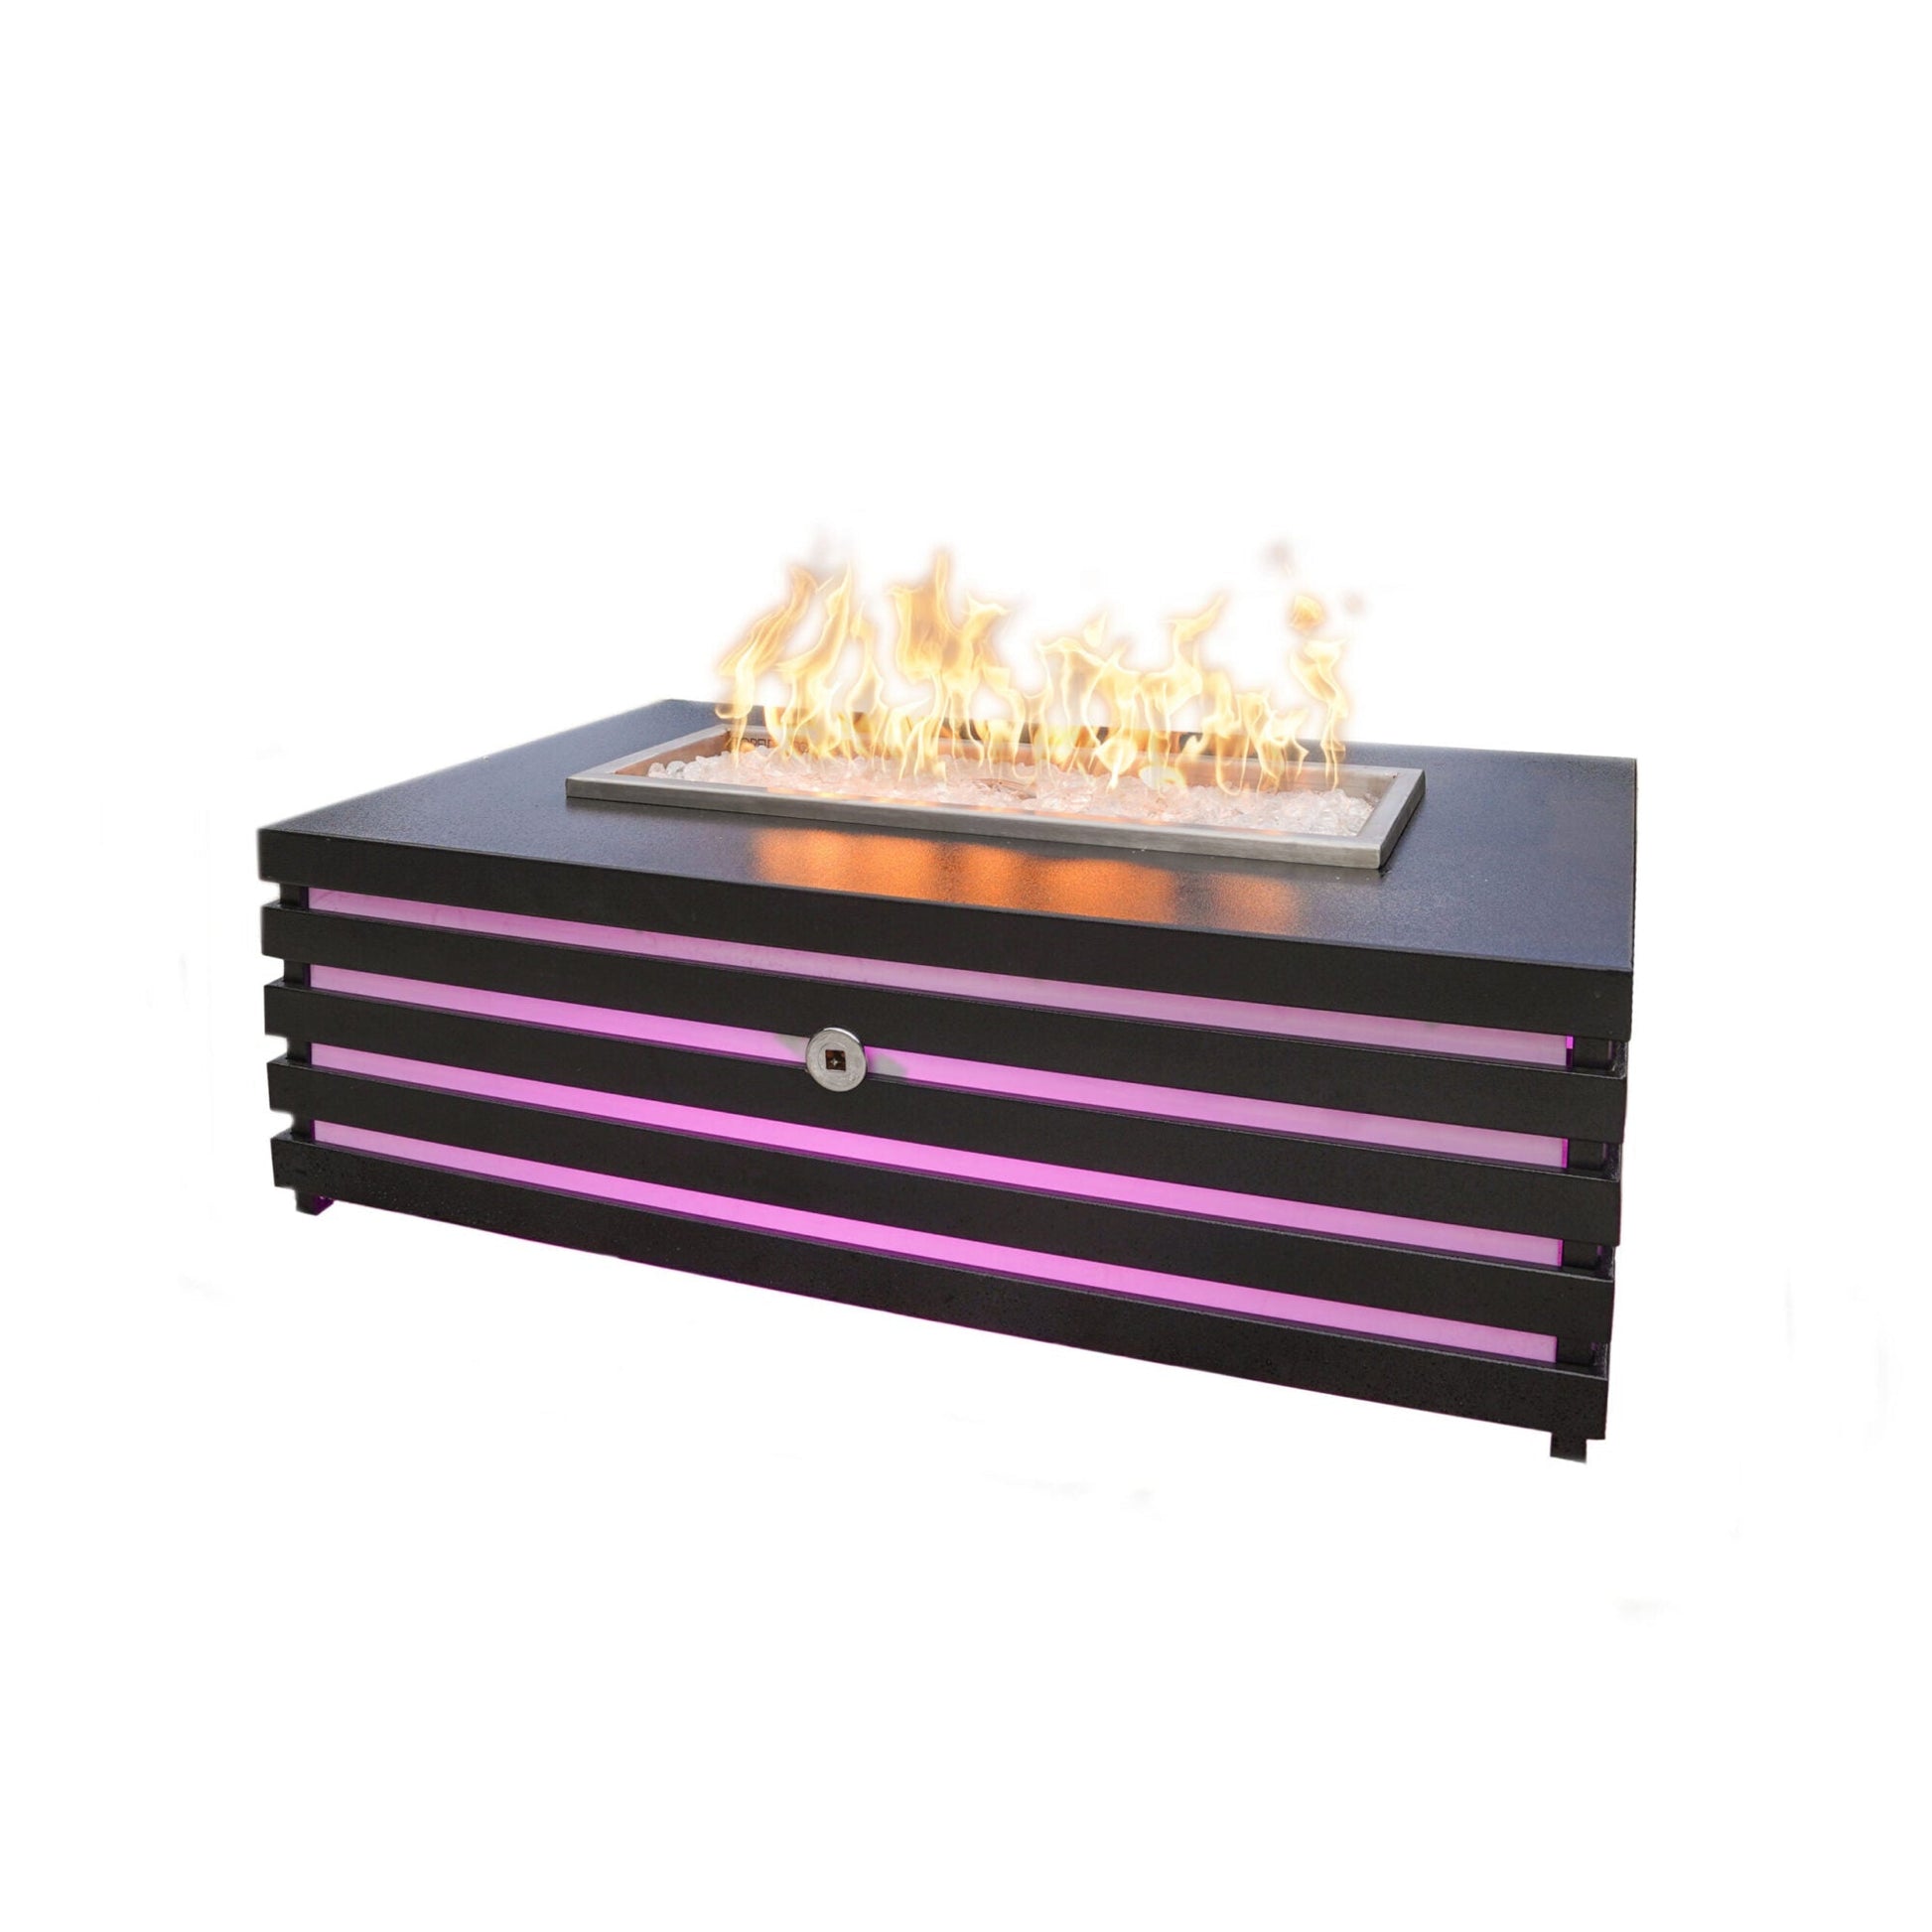 The Outdoor Plus Amina 60" Black Powder Coated Liquid Propane Fire Pit with Flame Sense with Spark Ignition